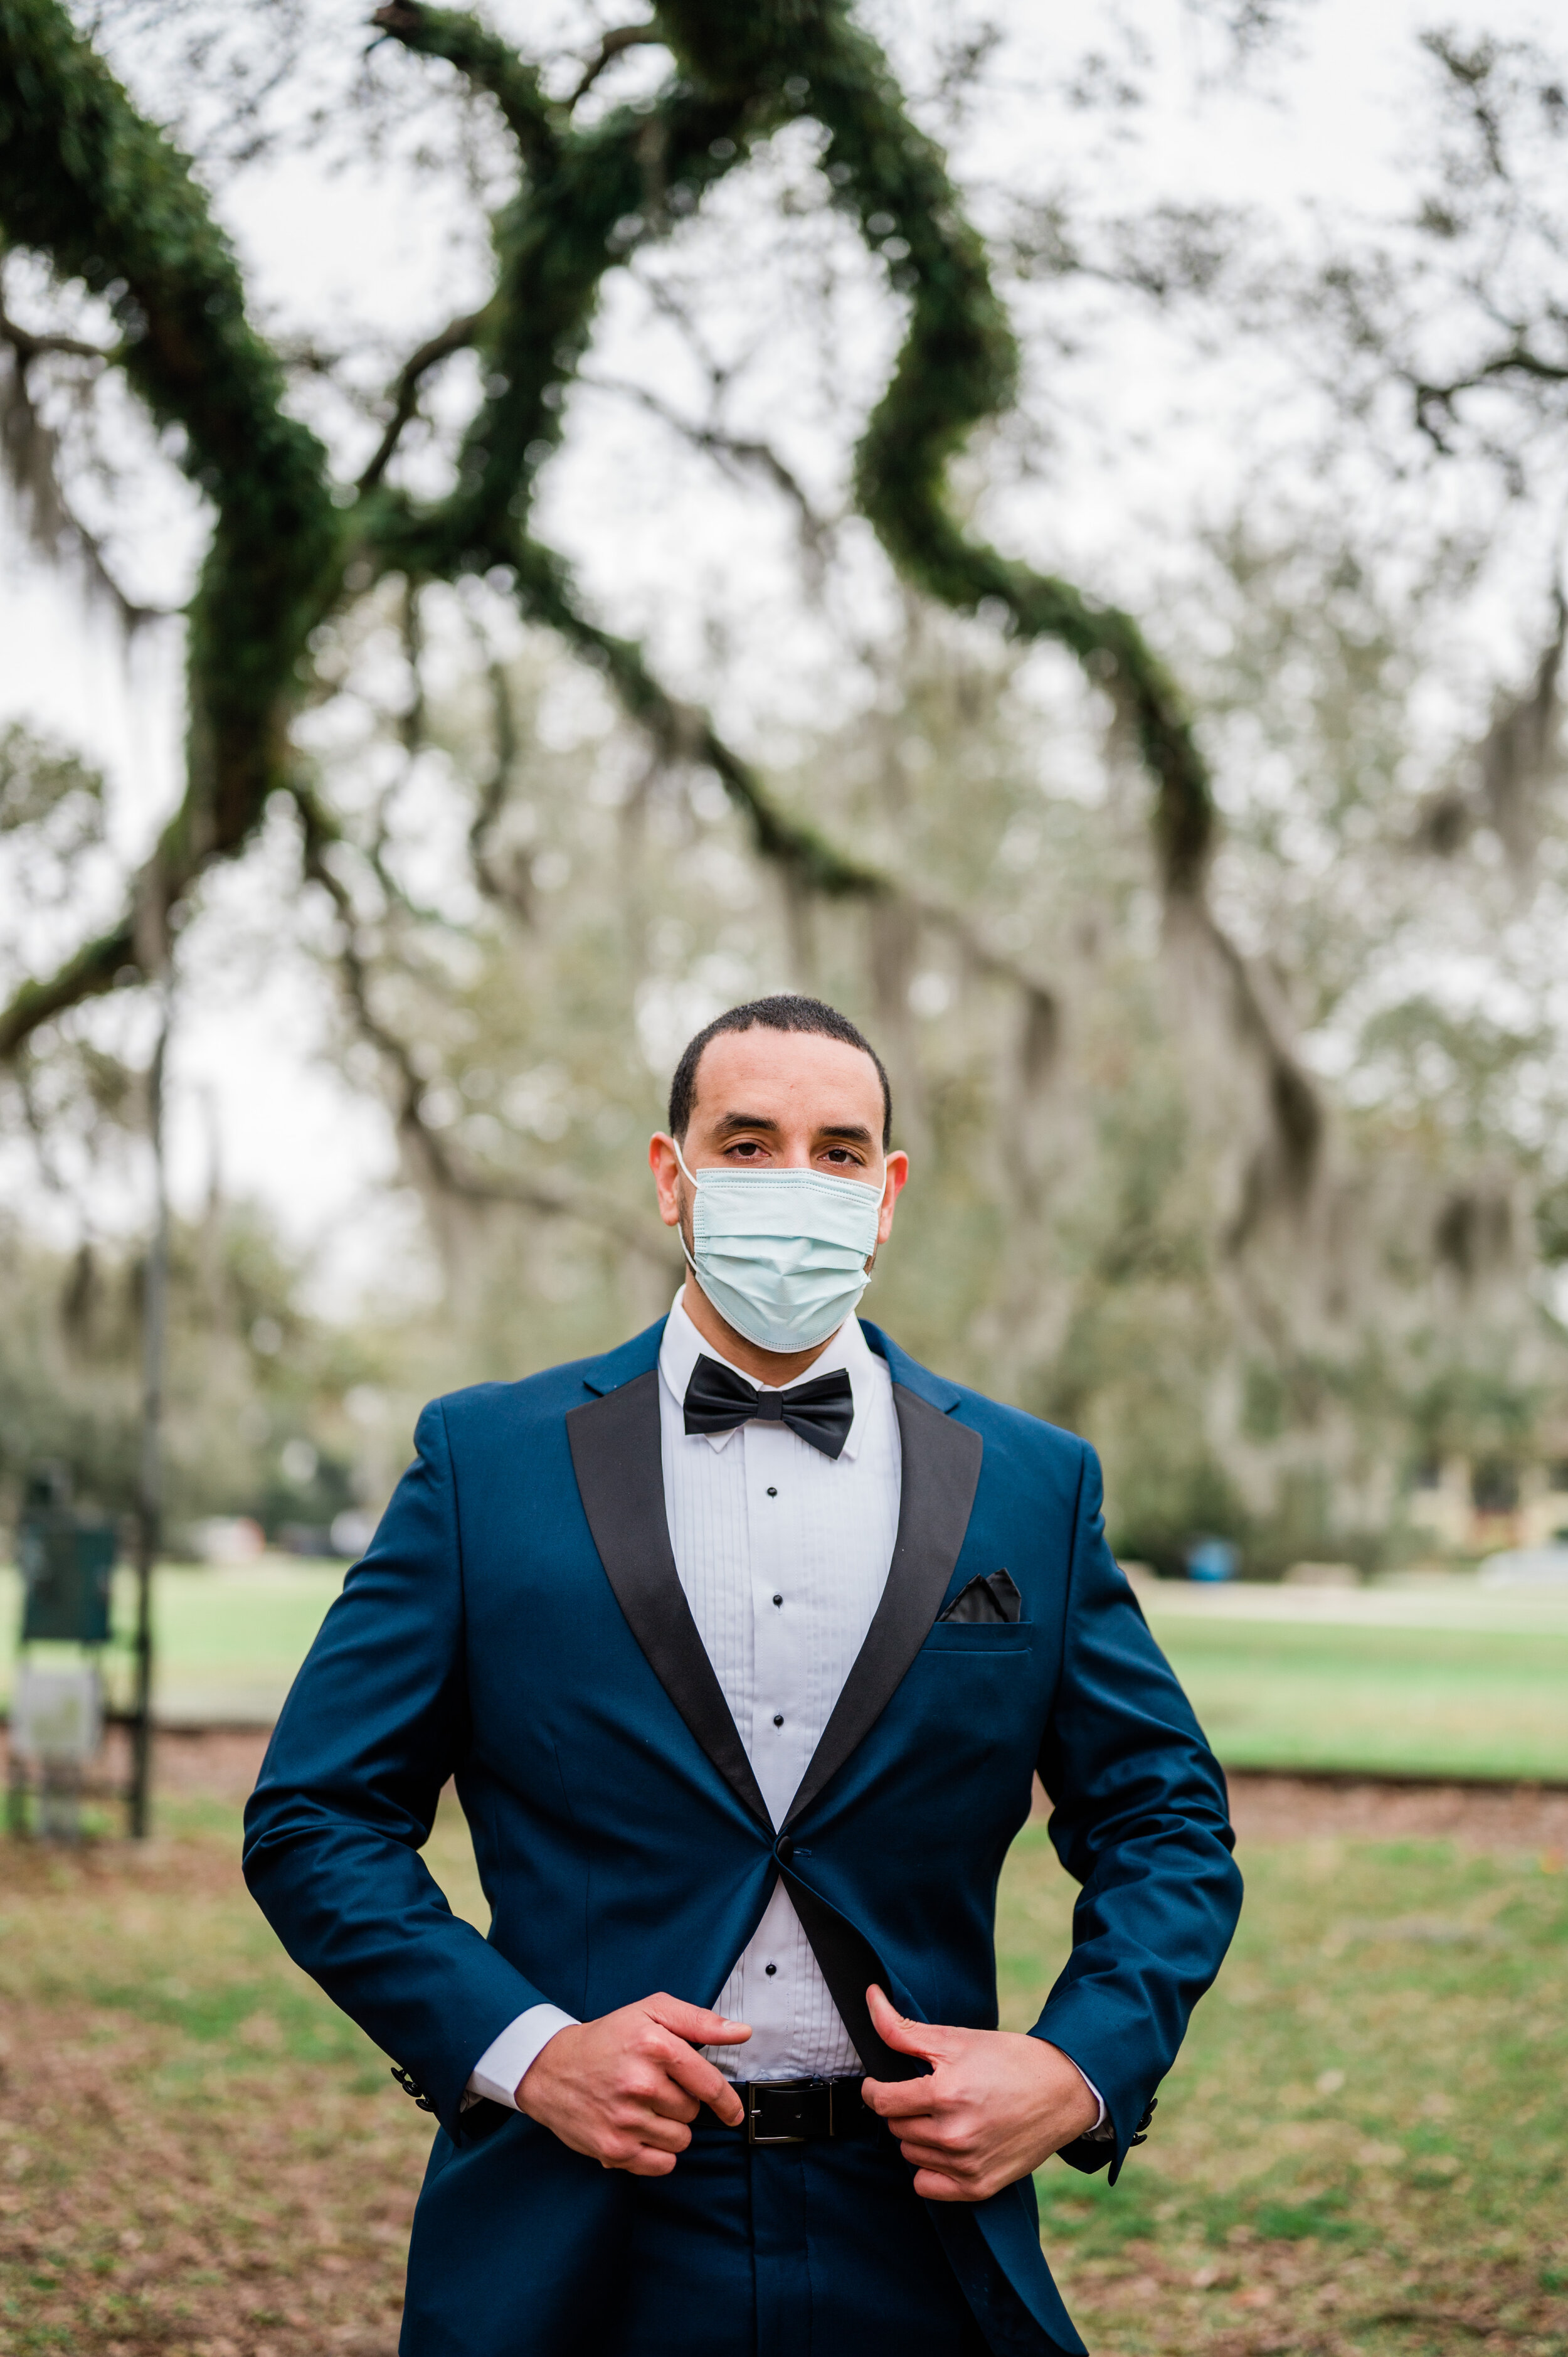 The groom with a mask 